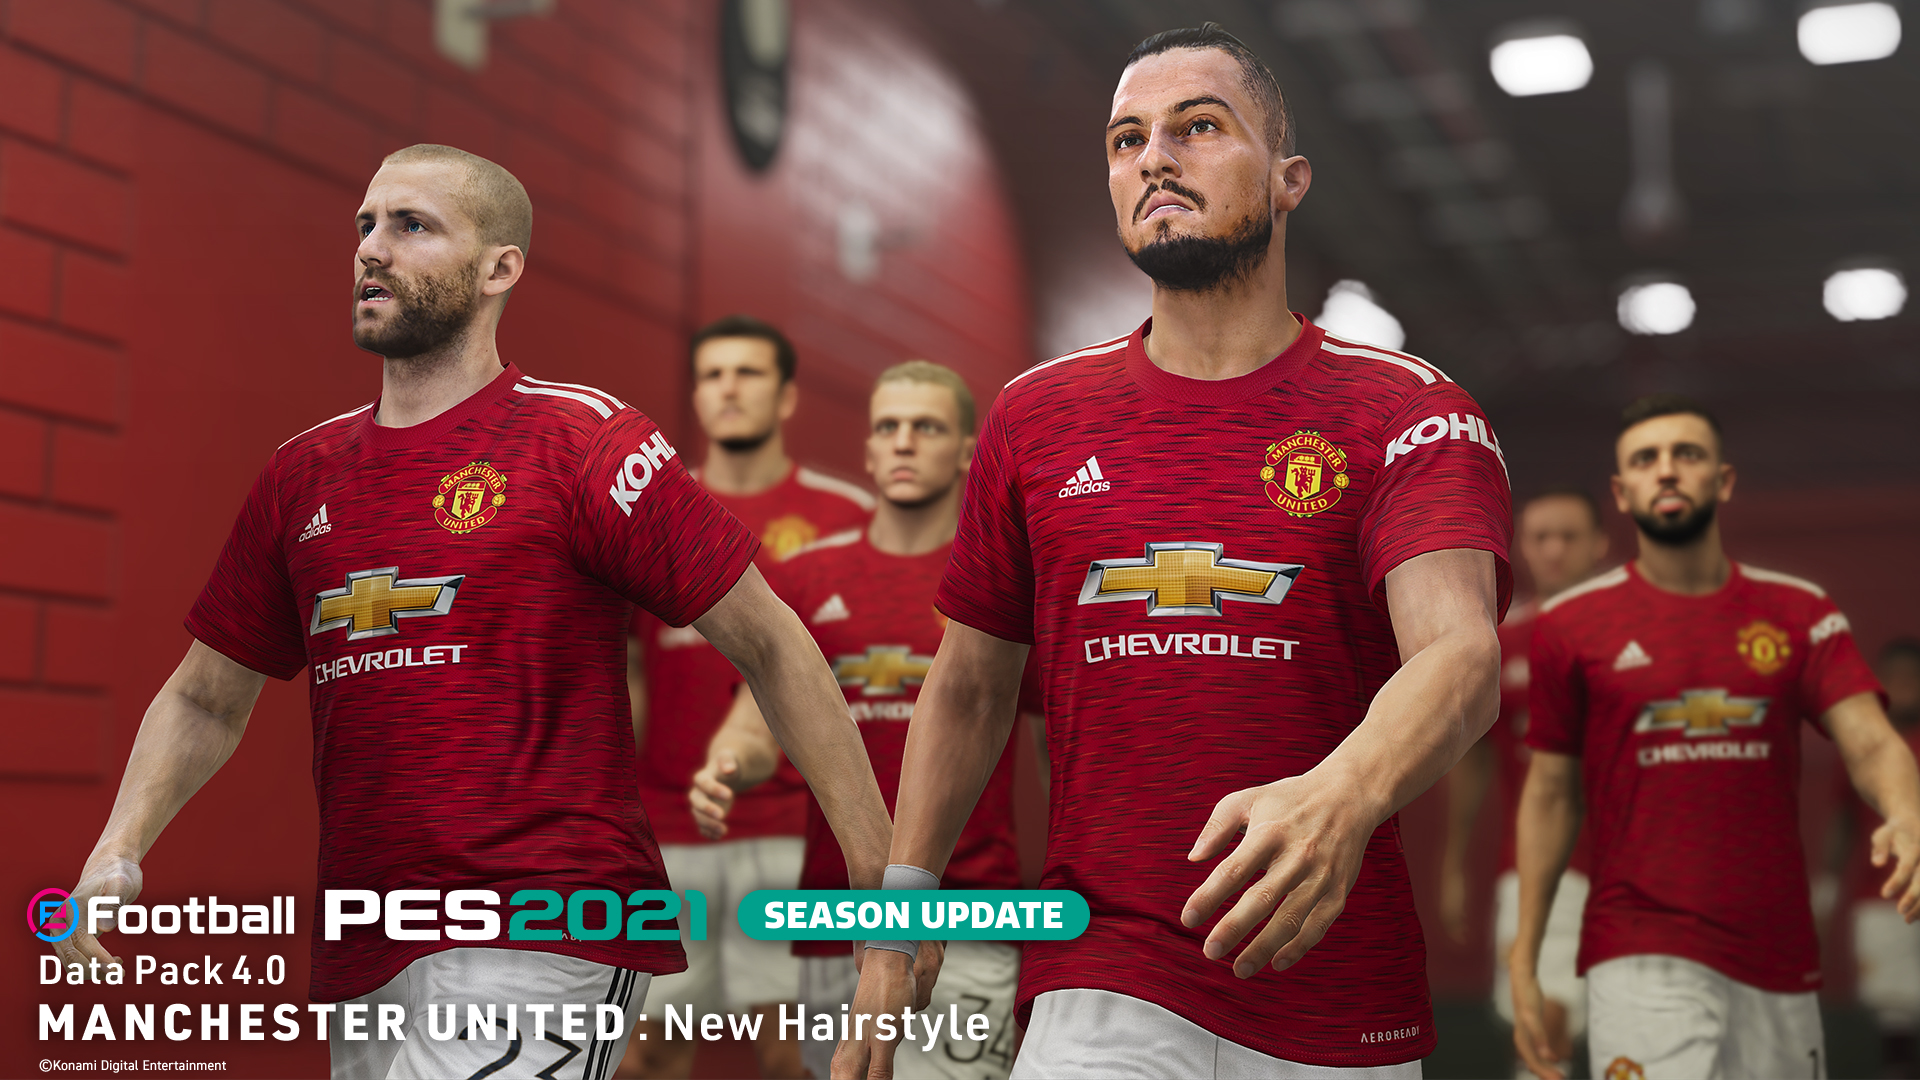 FIFA 23 playable with modest PC specs despite it being next-gen